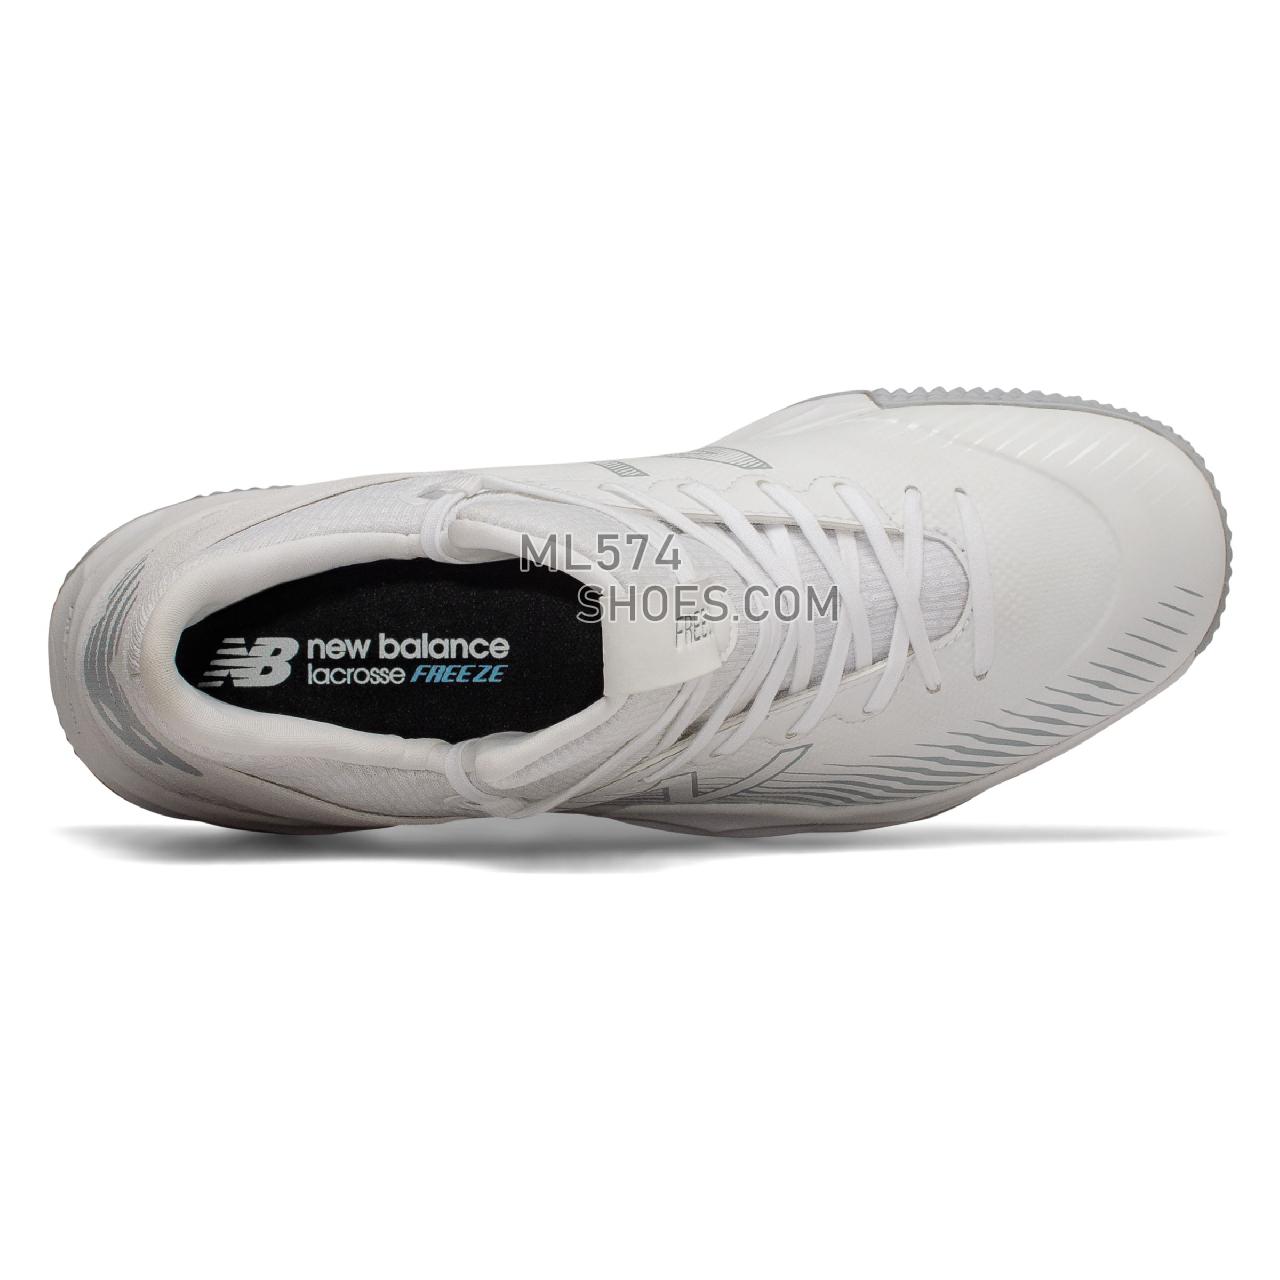 New Balance FreezeLX 2.0 Turf - Men's Turf And Lacrosse Cleats - White with Silver - FREEZTW2